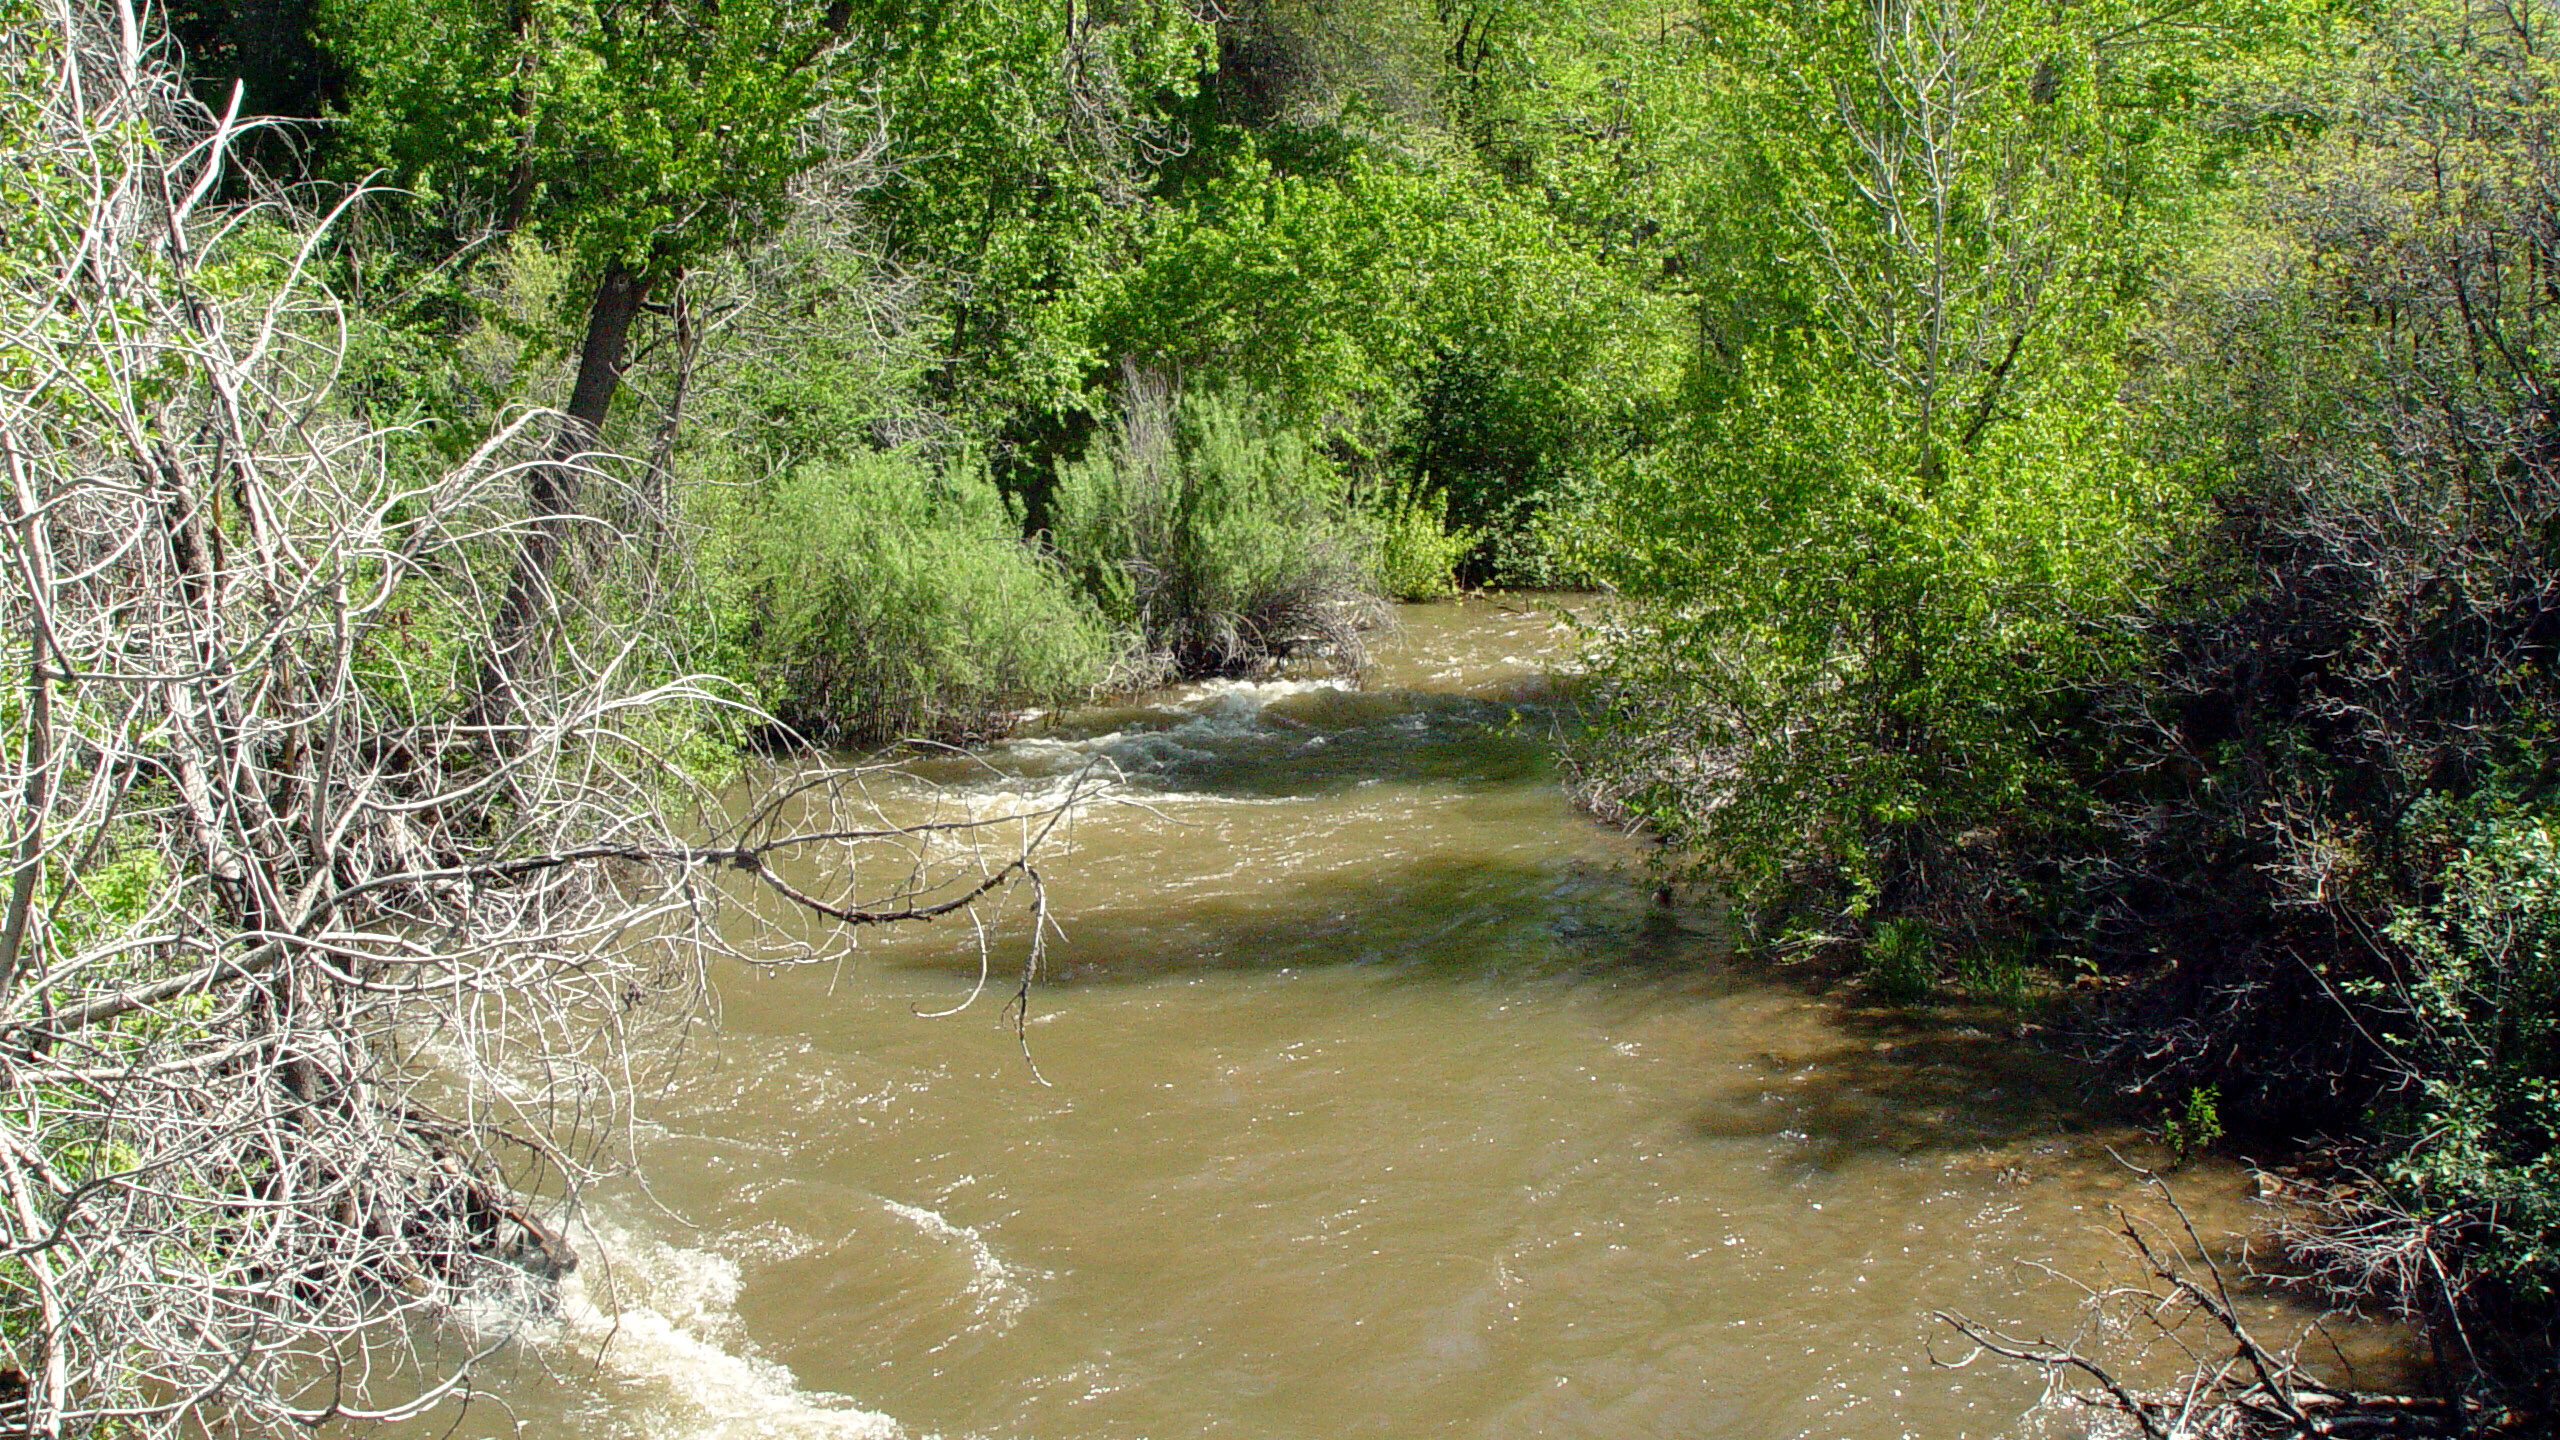 High amounts of spring runoff cause swelling of rivers across the state....